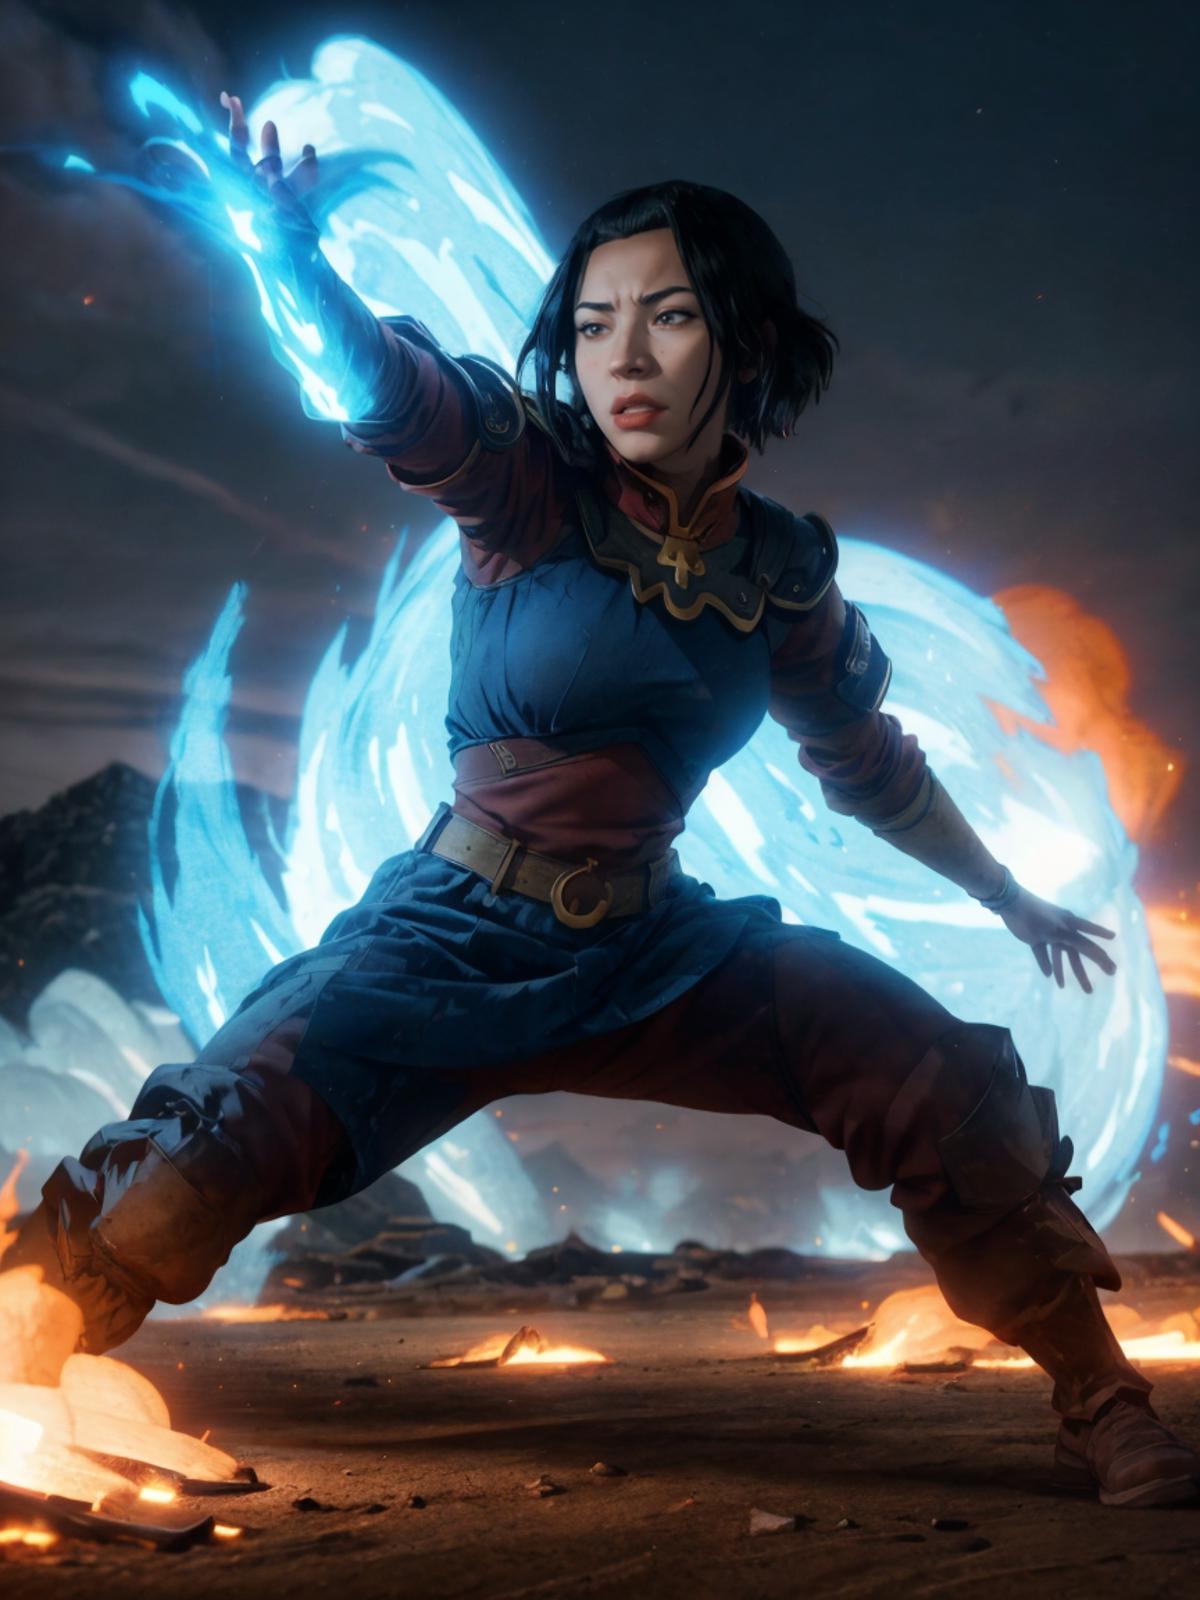 A woman in a blue dress with a blue and white aura and a blue sword is standing in front of a blue flame.